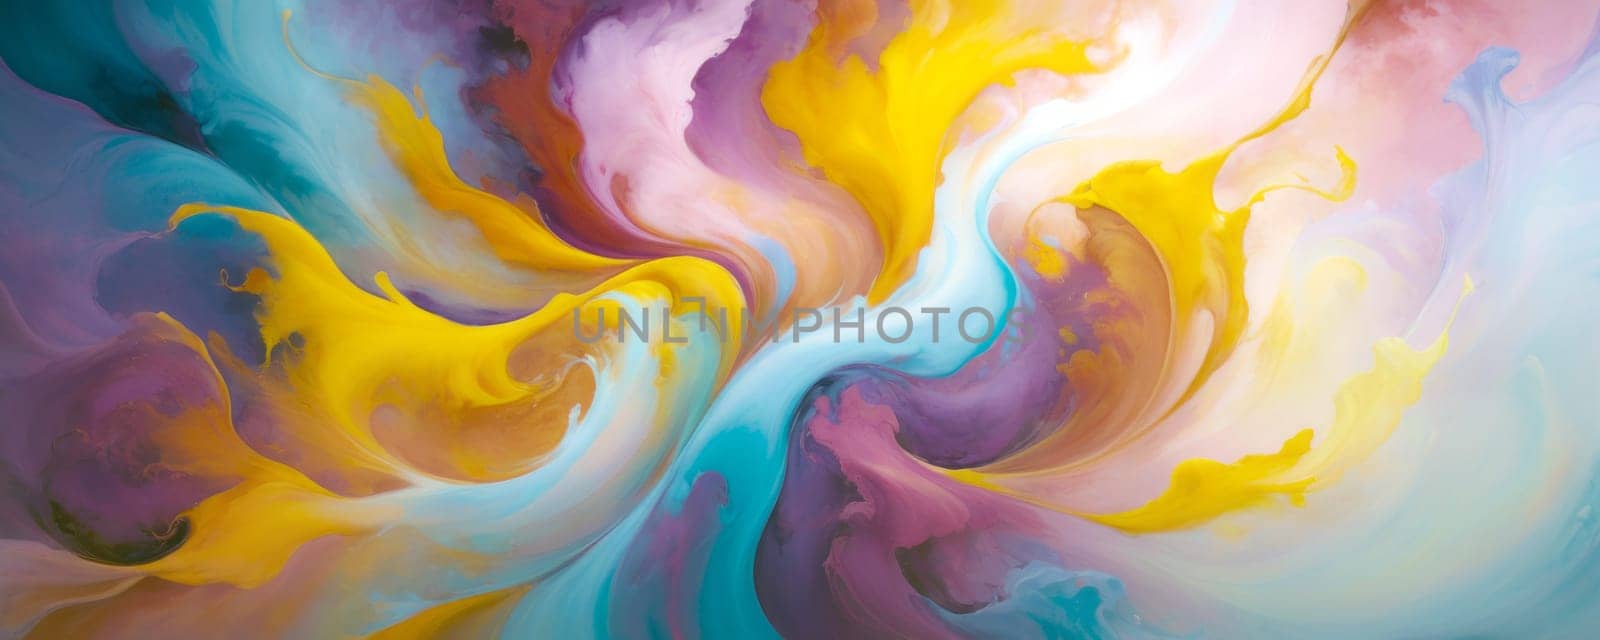 Abstract Mix of Swirling Colors on a Light Background by nkotlyar